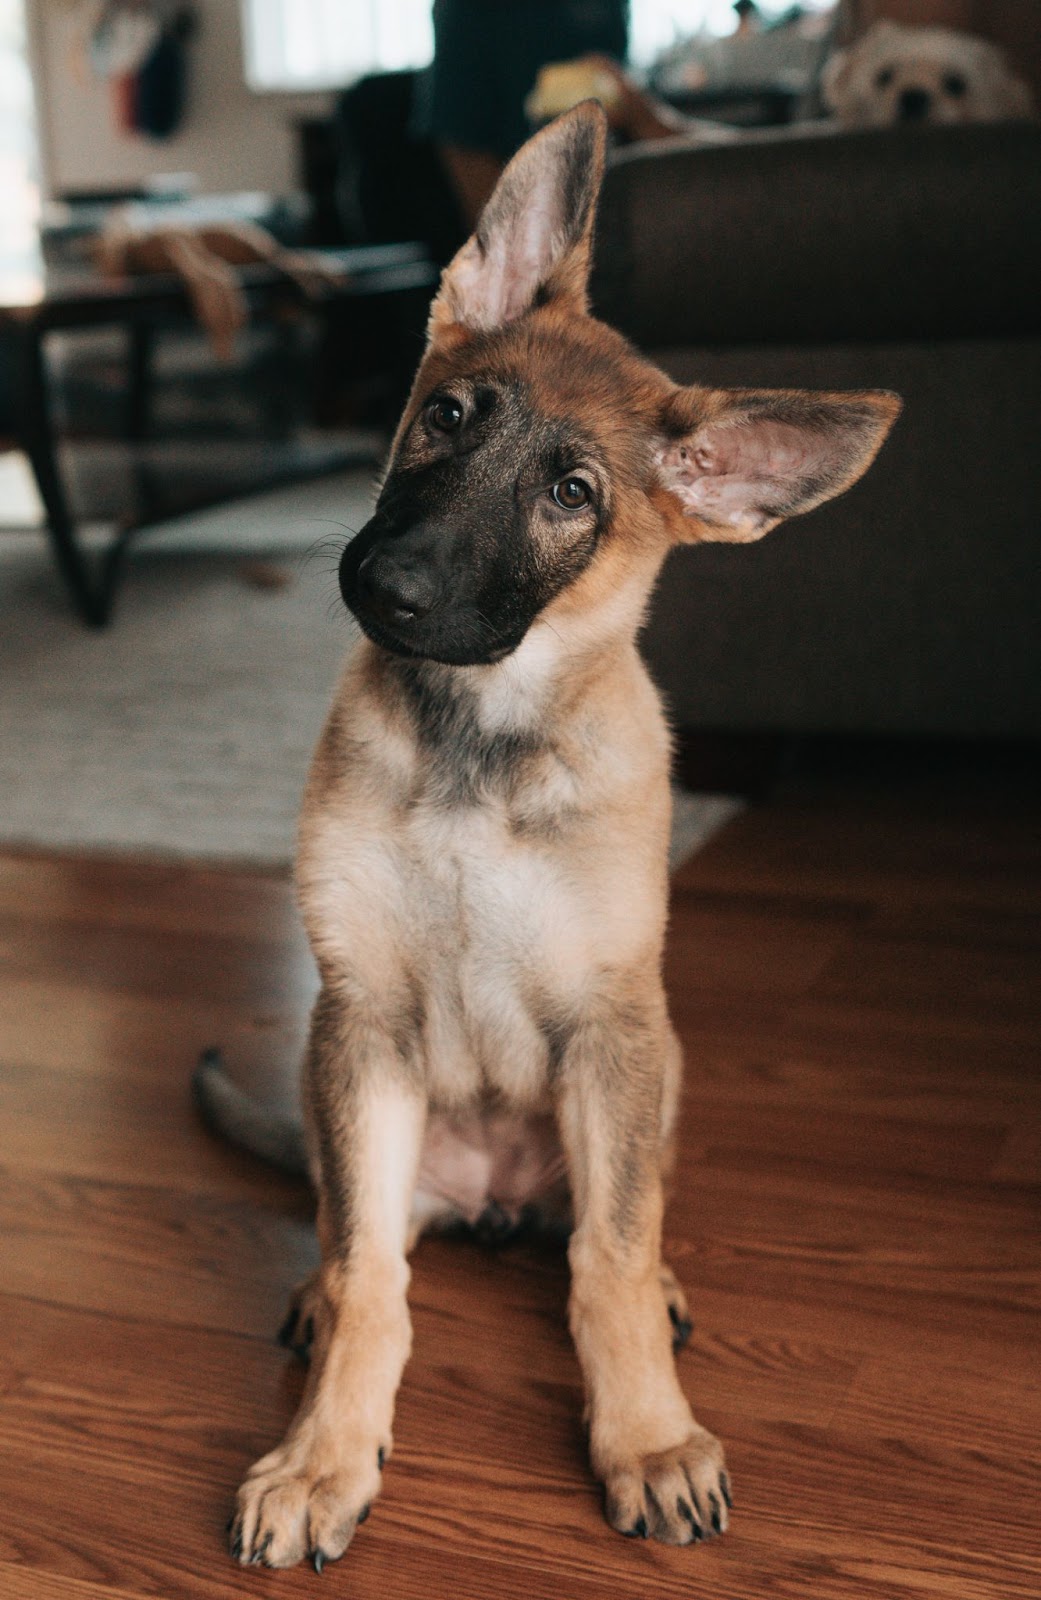 A picture of a young German shepherd with its head cocked to the side, looking puzzled.